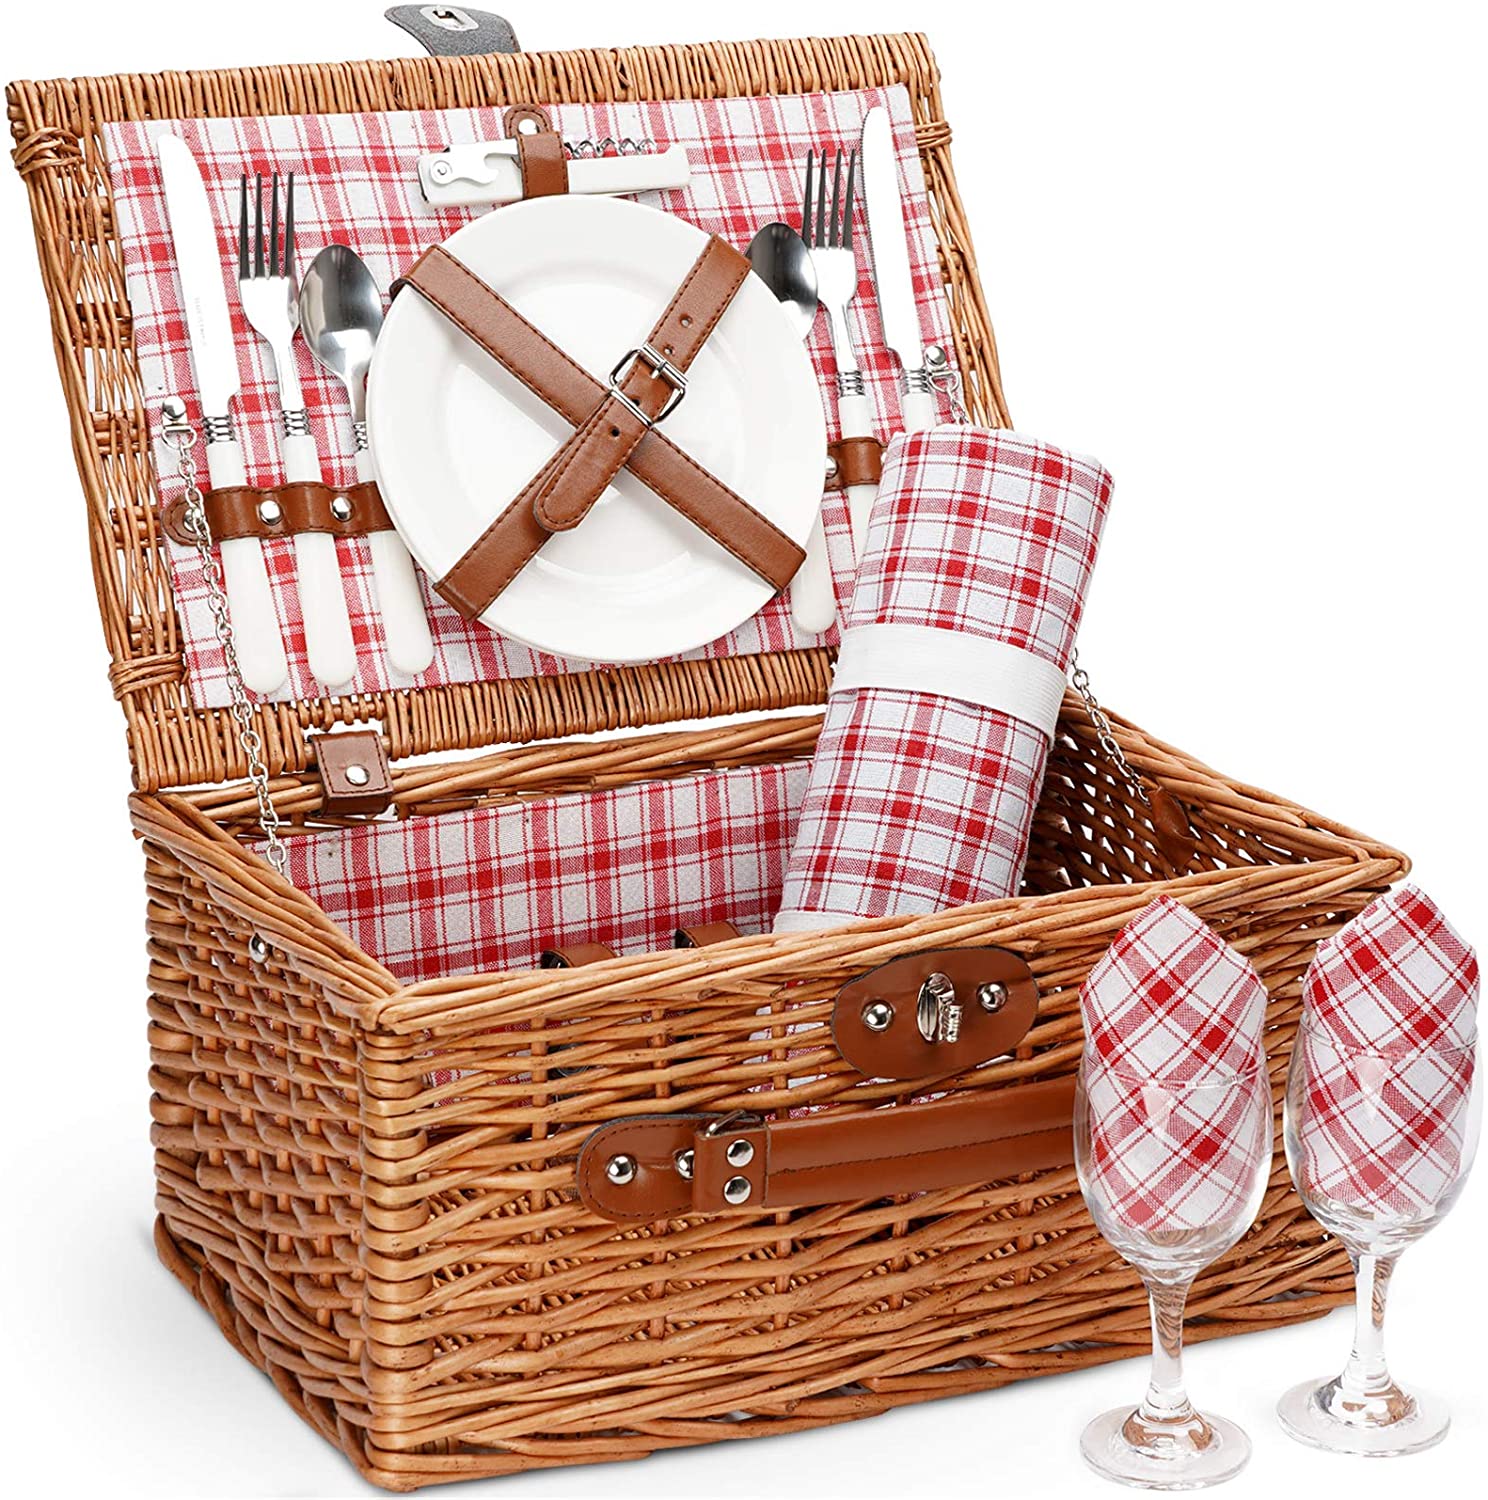 Picnic Basket for 2, with Waterproof Picnic Blanket by G Good Gain